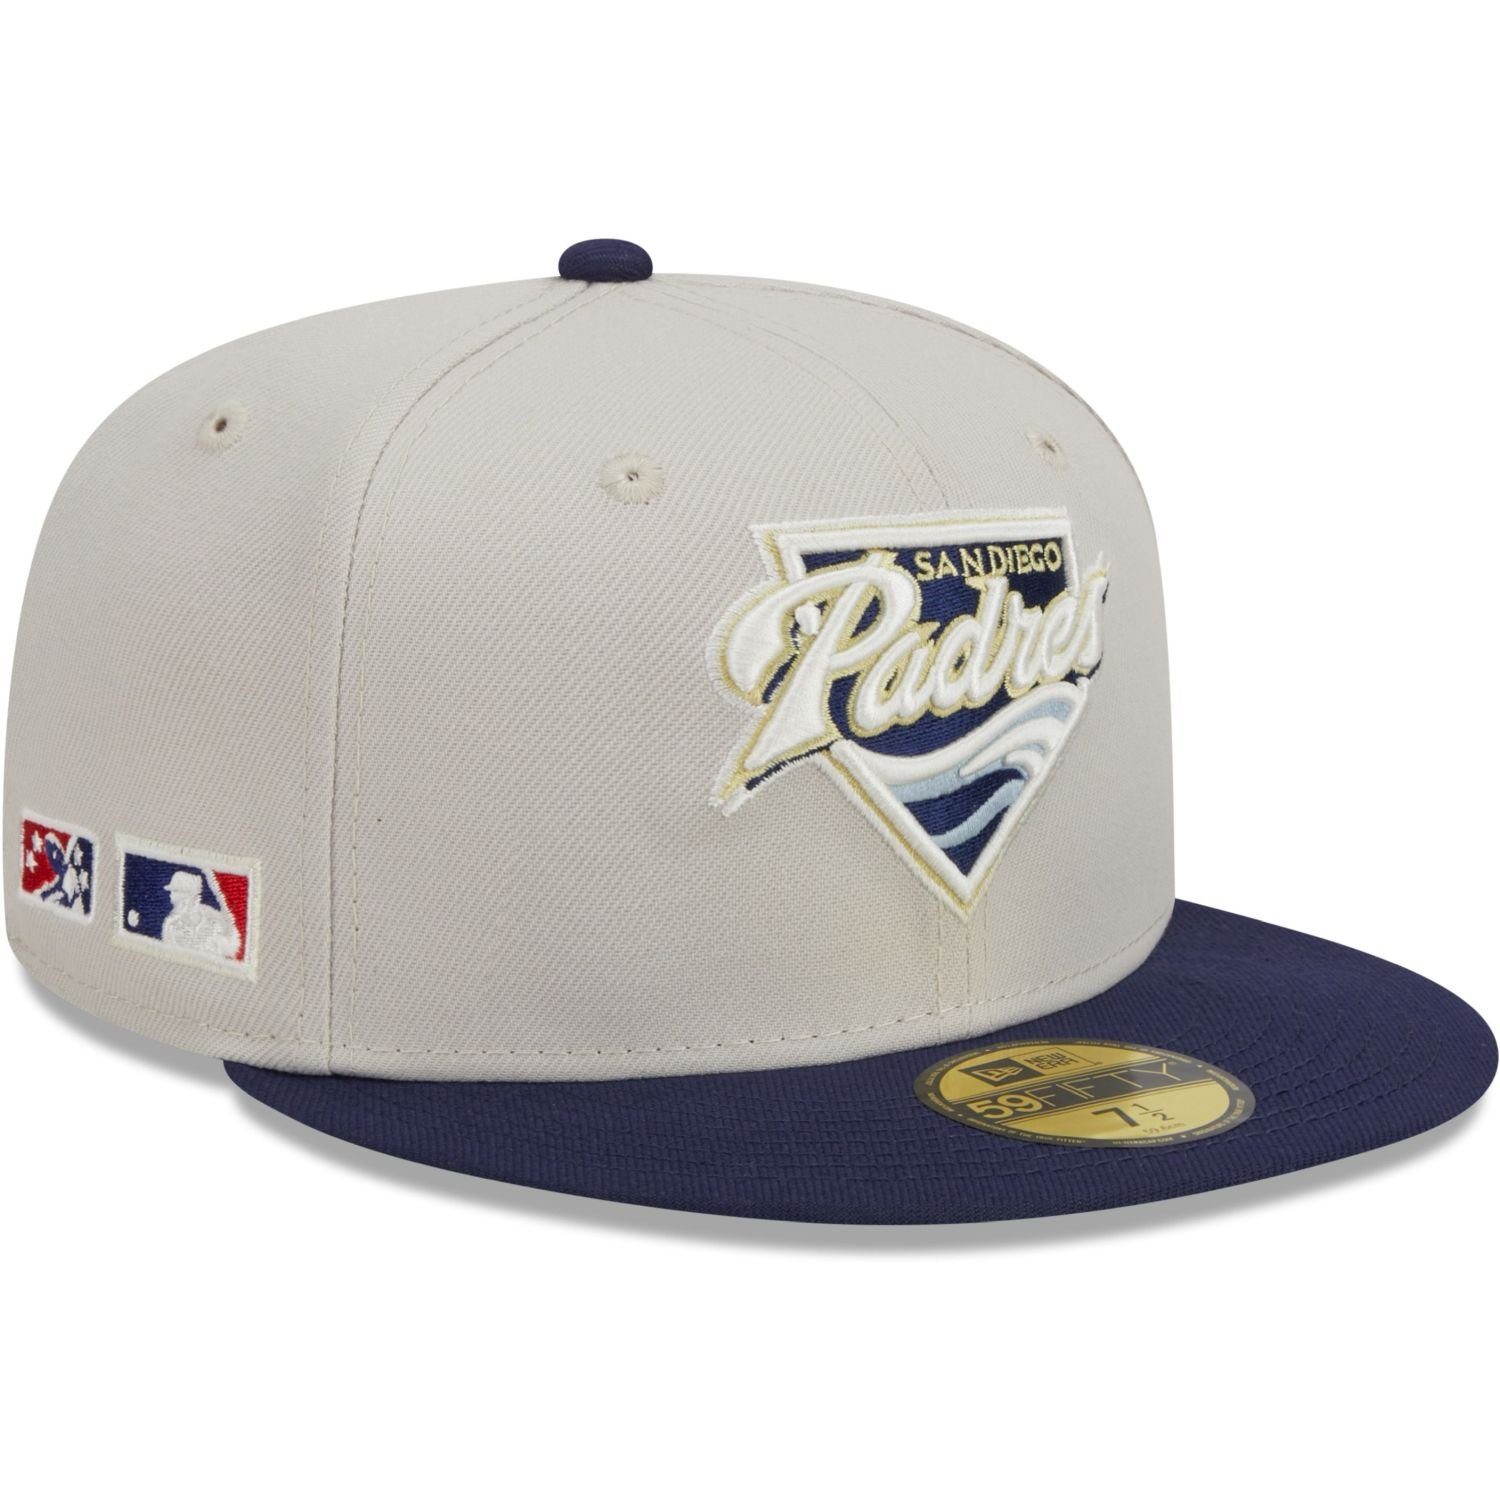 New Era Fitted Cap 59Fifty FARM TEAM San Diego Padres